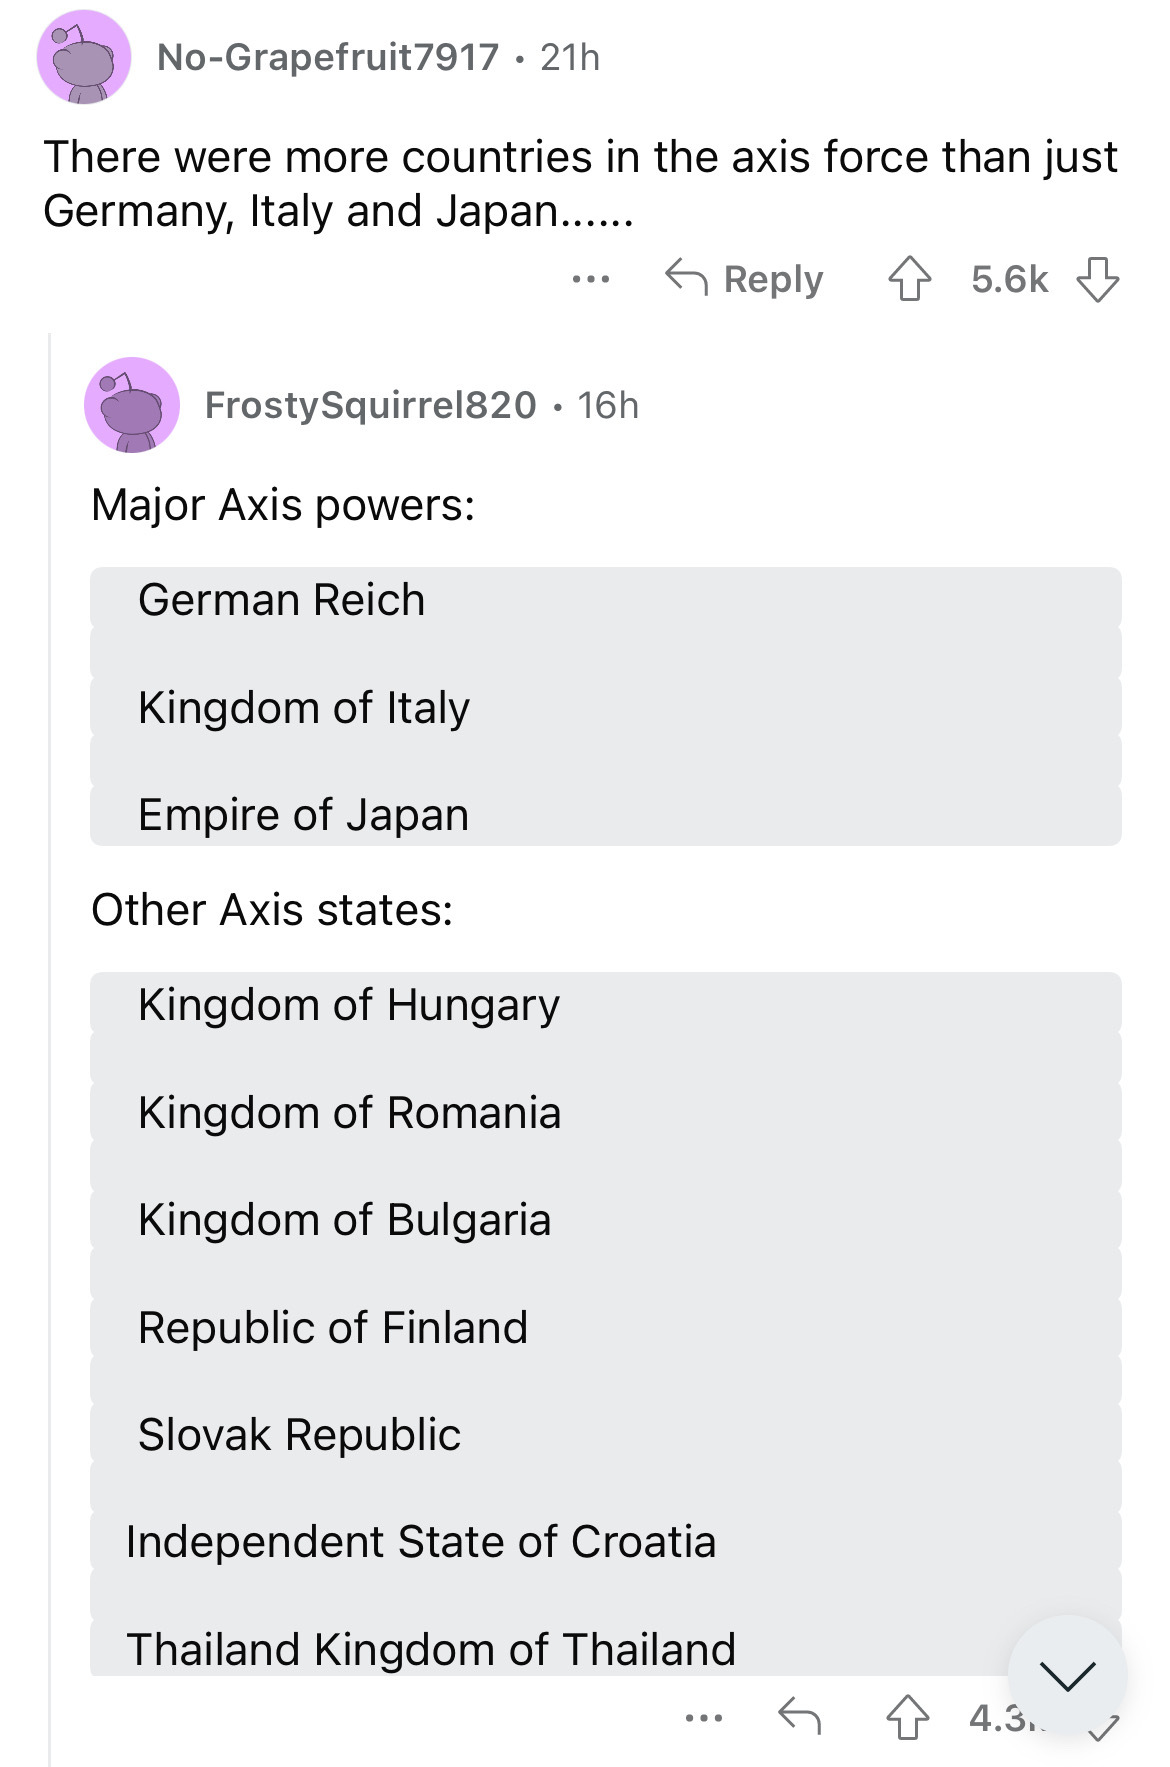 document - NoGrapefruit7917. 21h There were more countries in the axis force than just Germany, Italy and Japan...... Frosty Squirrel820. 16h Major Axis powers German Reich Kingdom of Italy Empire of Japan Other Axis states ... Kingdom of Hungary Kingdom 